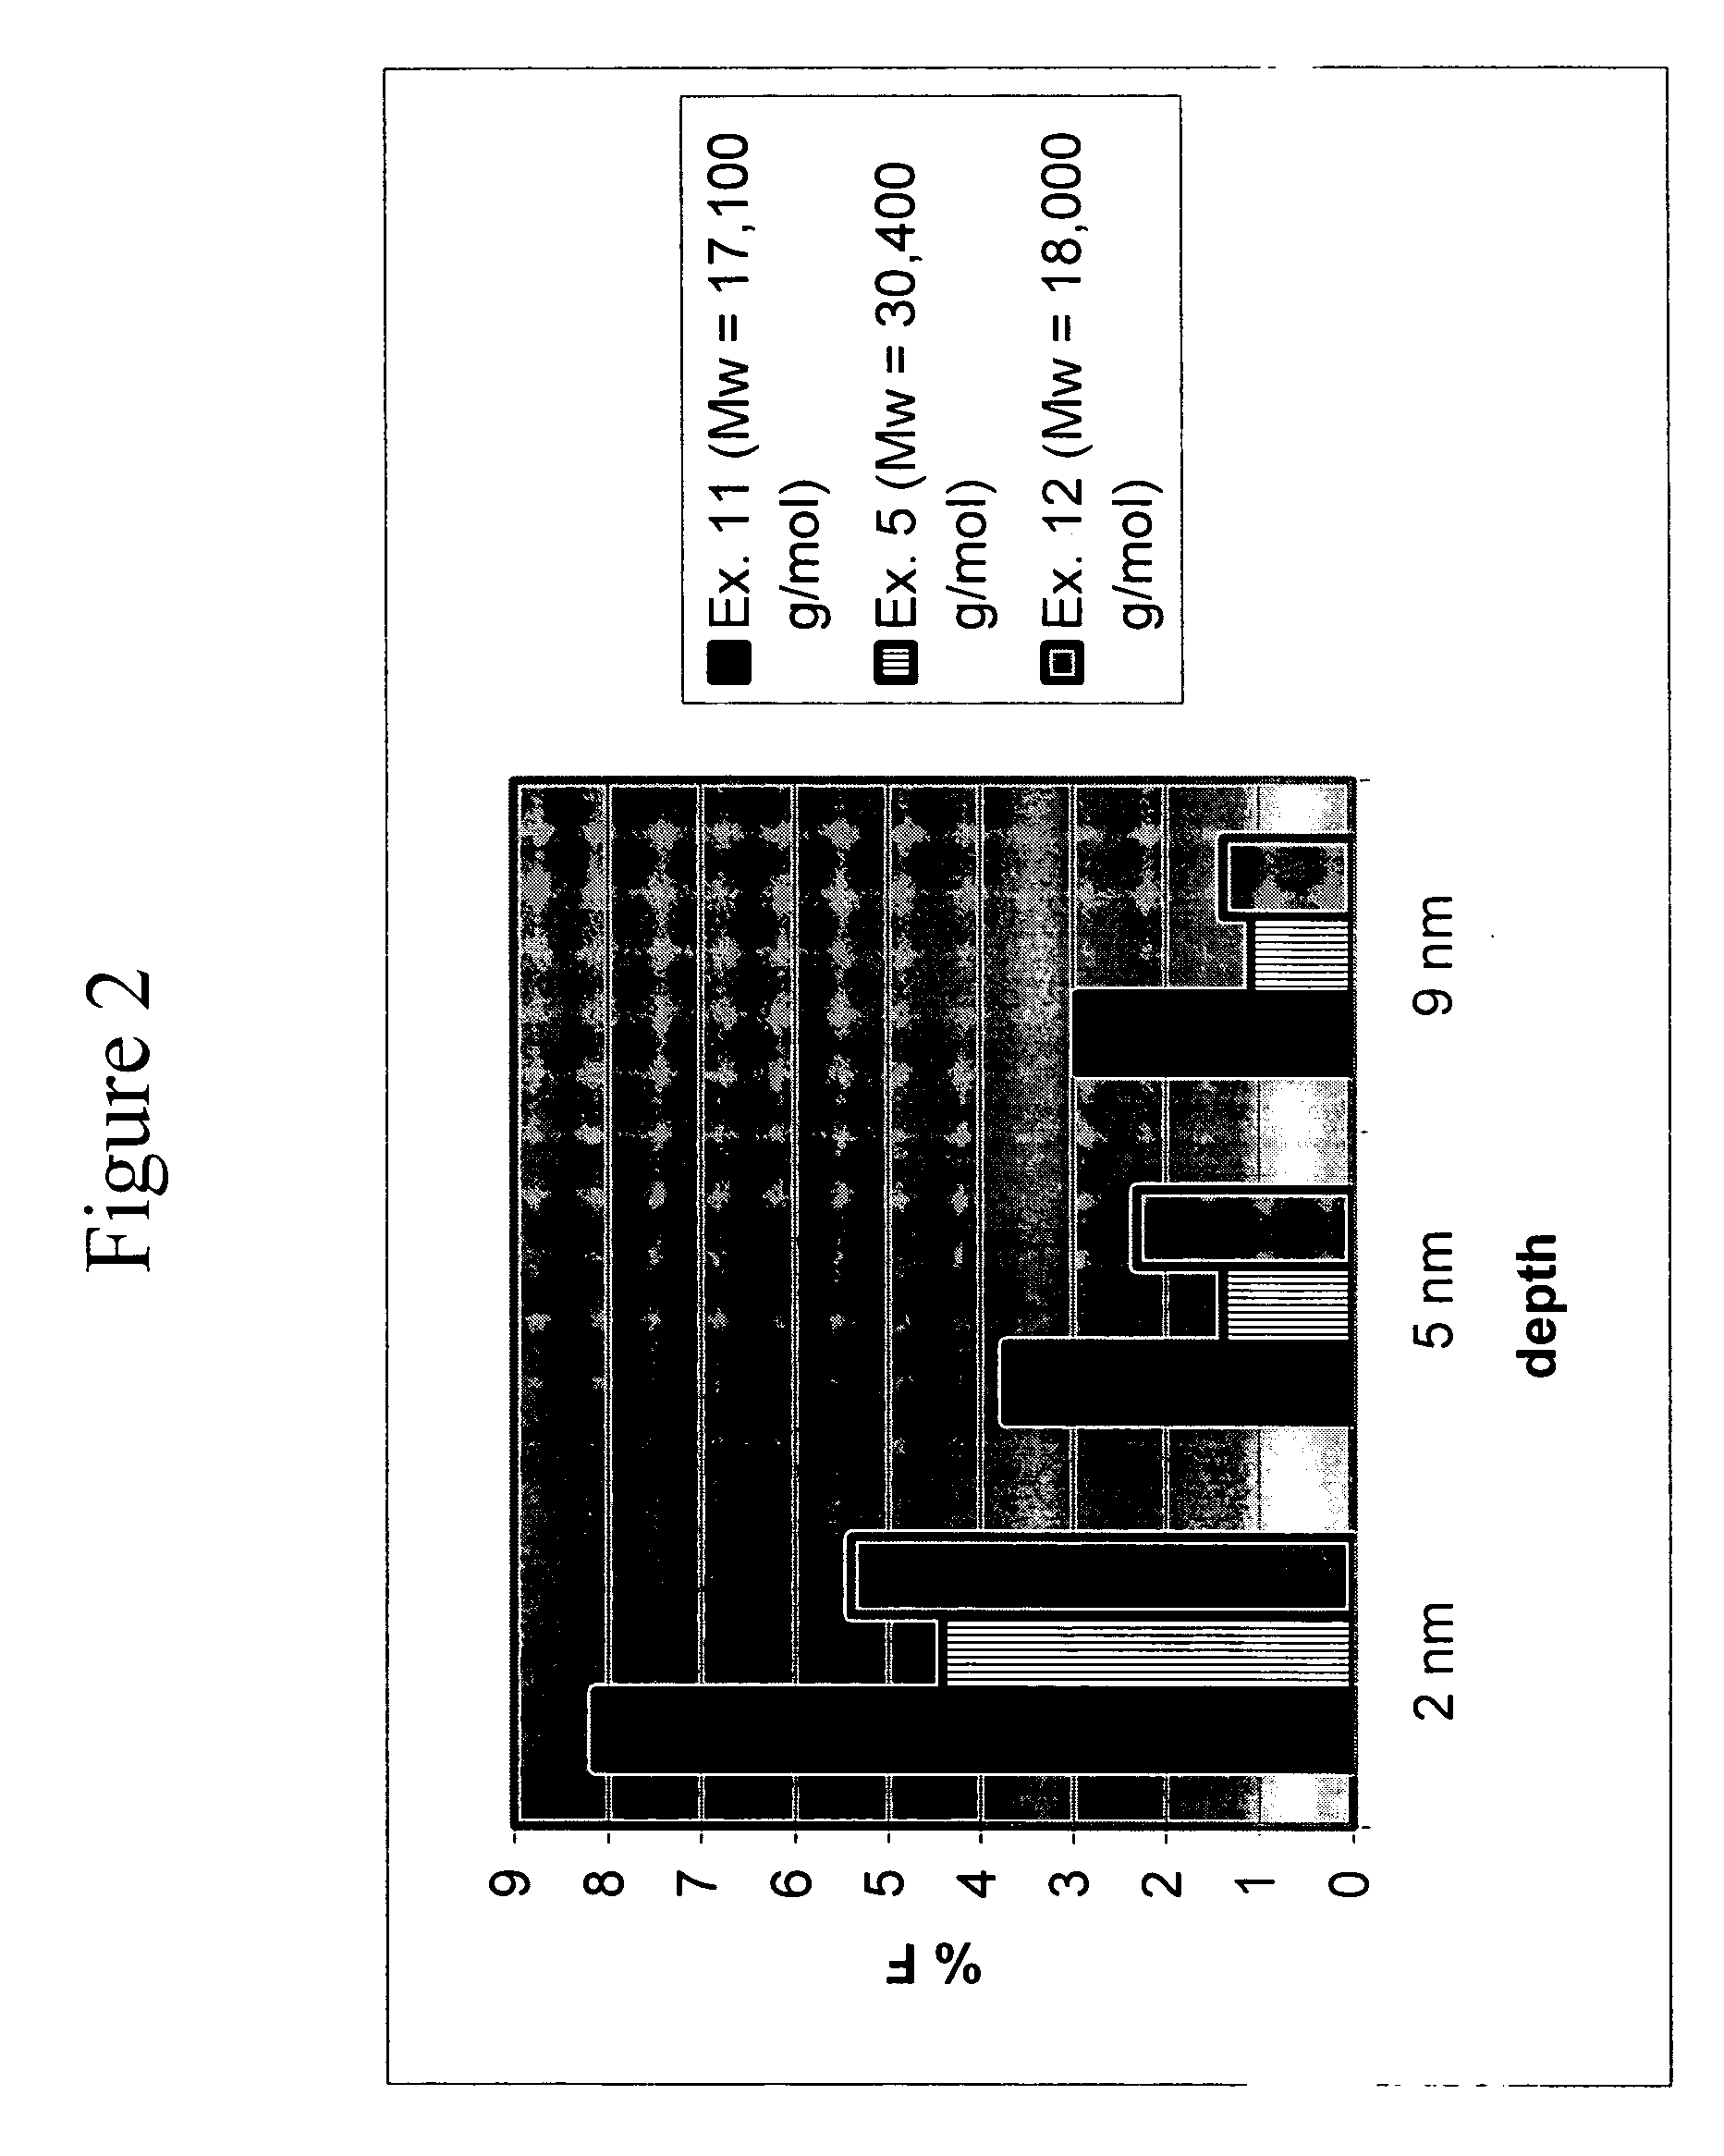 Polycarbonates with fluoroalkylene carbonate end groups